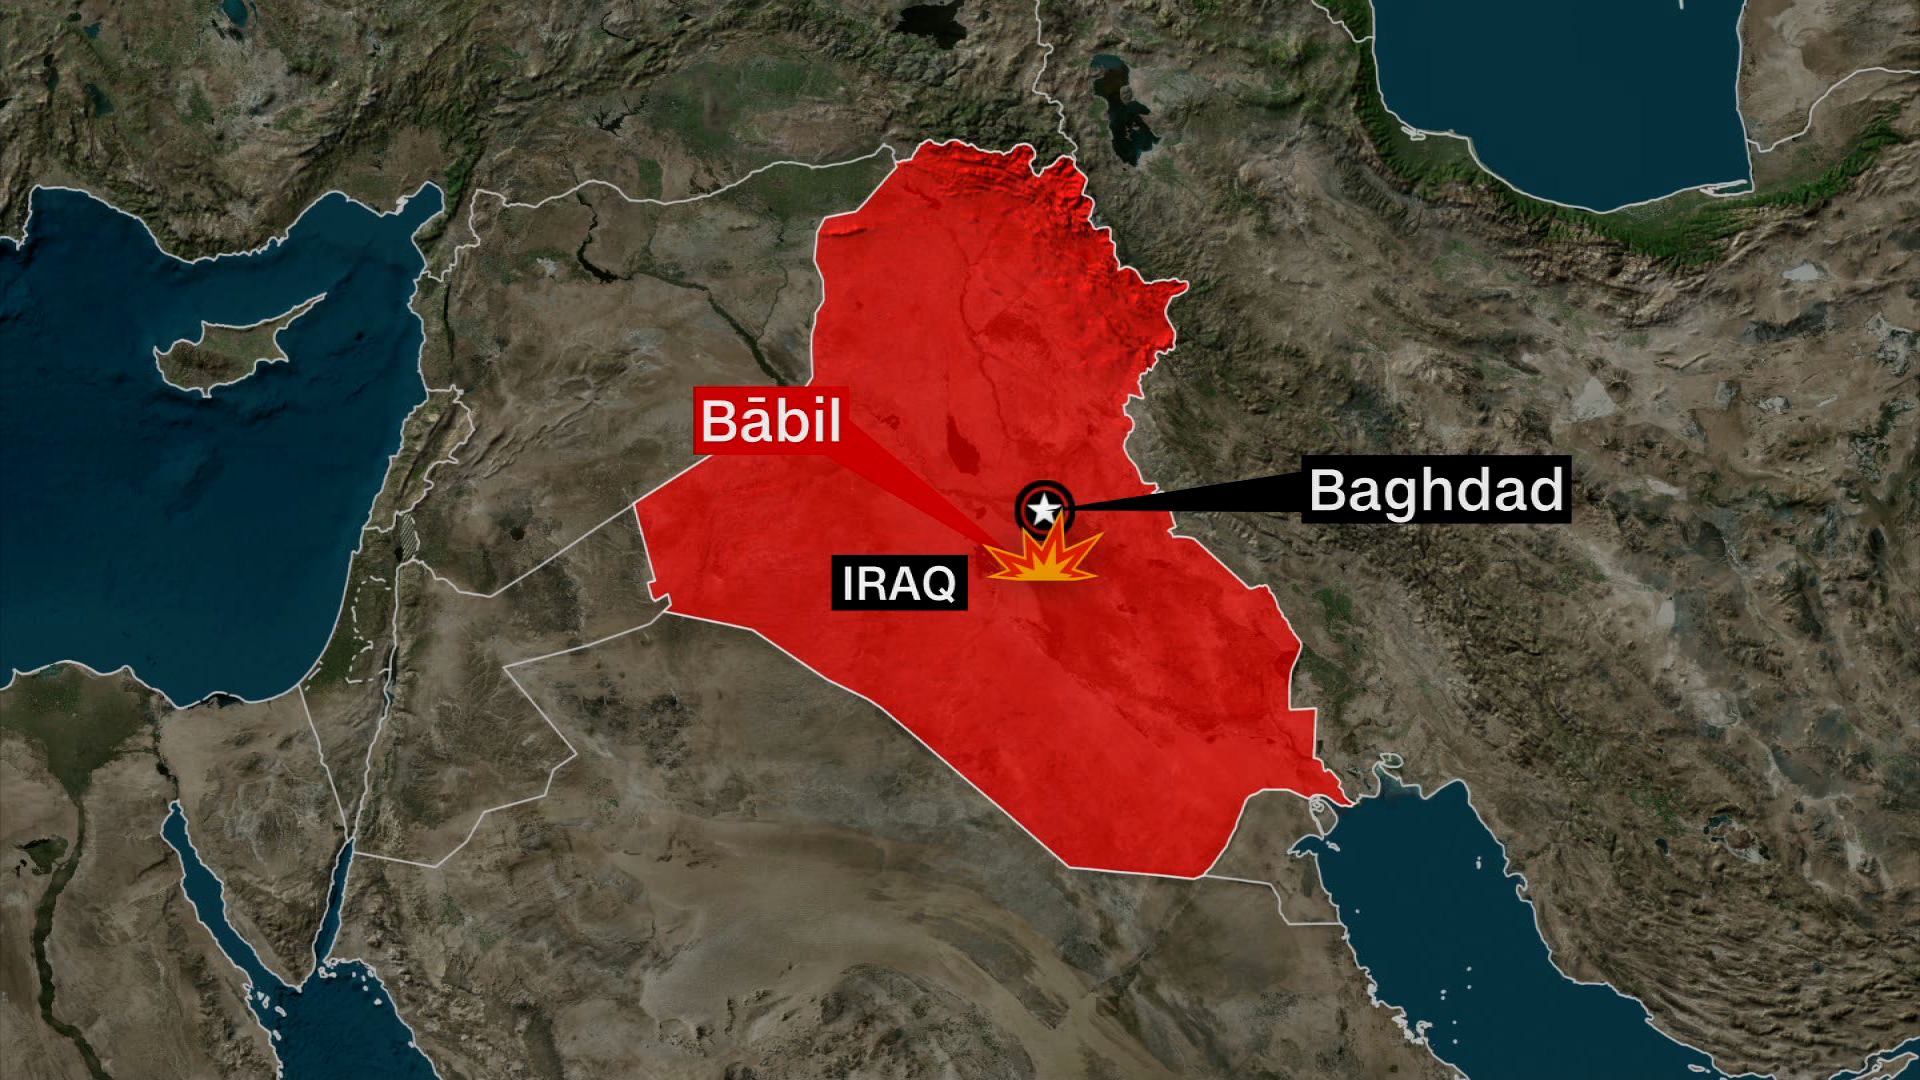 Video appears to show aftermath of explosions at Iran-backed base in Iraq